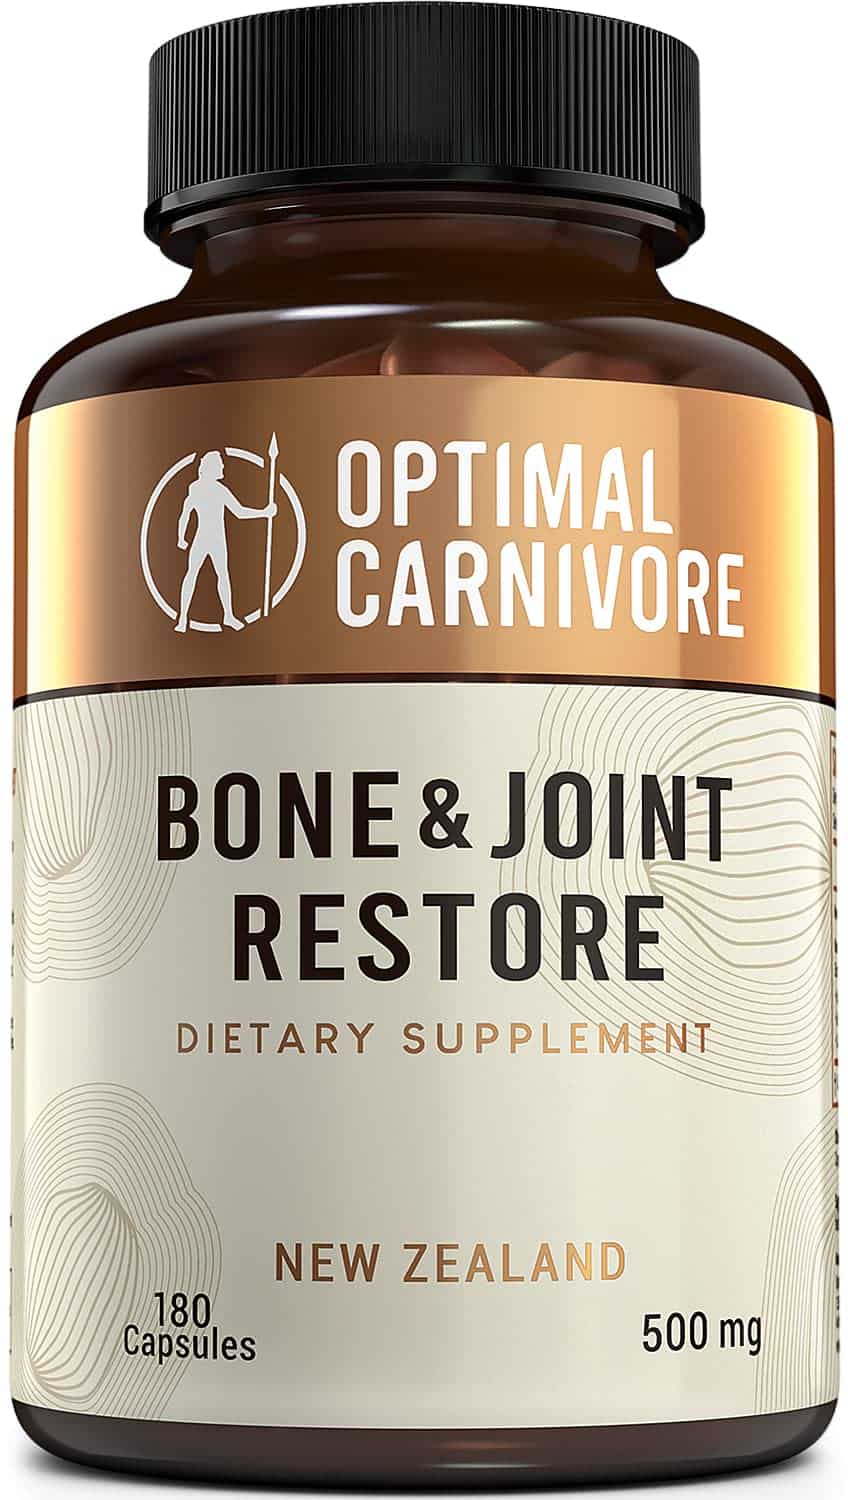 Grass Fed Bone Marrow Supplement & Bovine Tracheal Cartilage, Restore Joint Health Supplement, Support Strength and Fracture Bone & Joint Restore